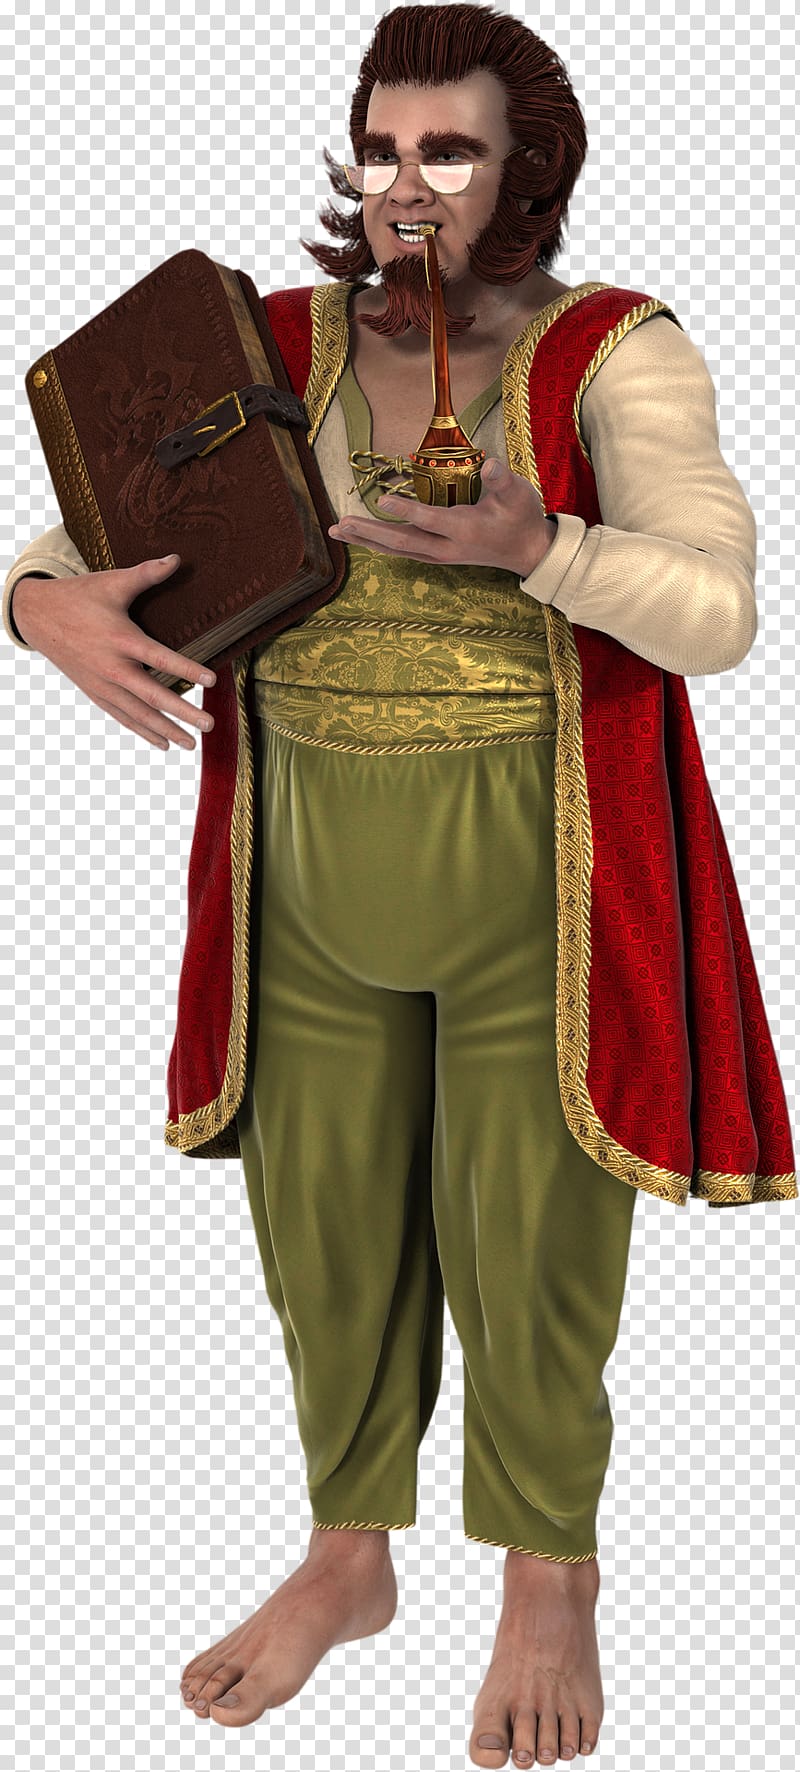 Magician The Lord of the Rings: The Return of the King Costume, wizard transparent background PNG clipart